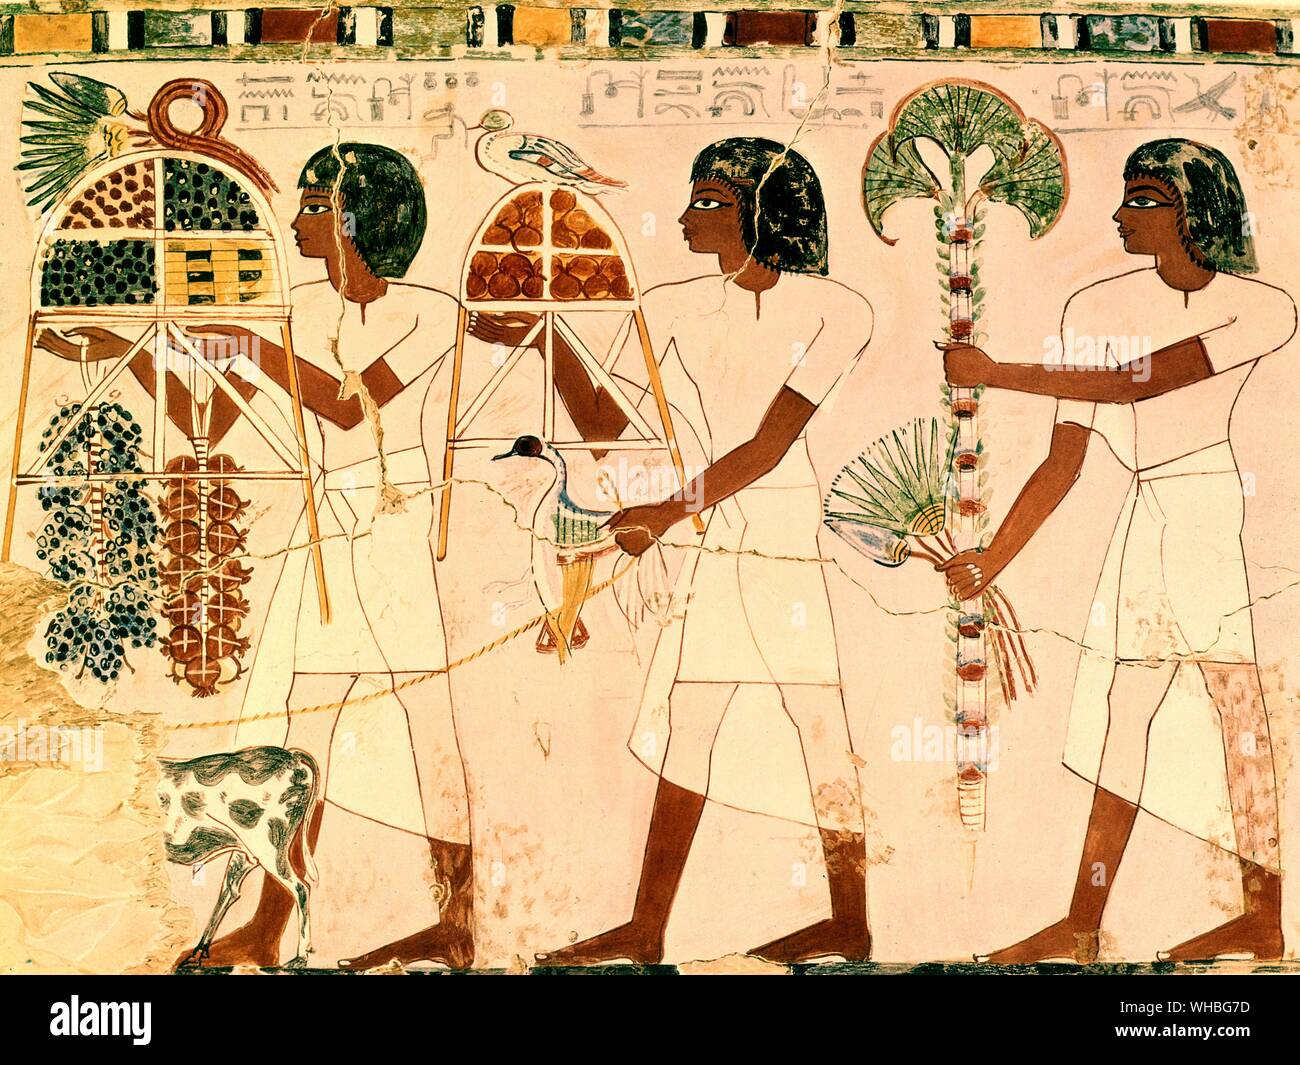 Copy of an Egyptian tomb - painting - male offering bringers - 18th dynasty. Stock Photo